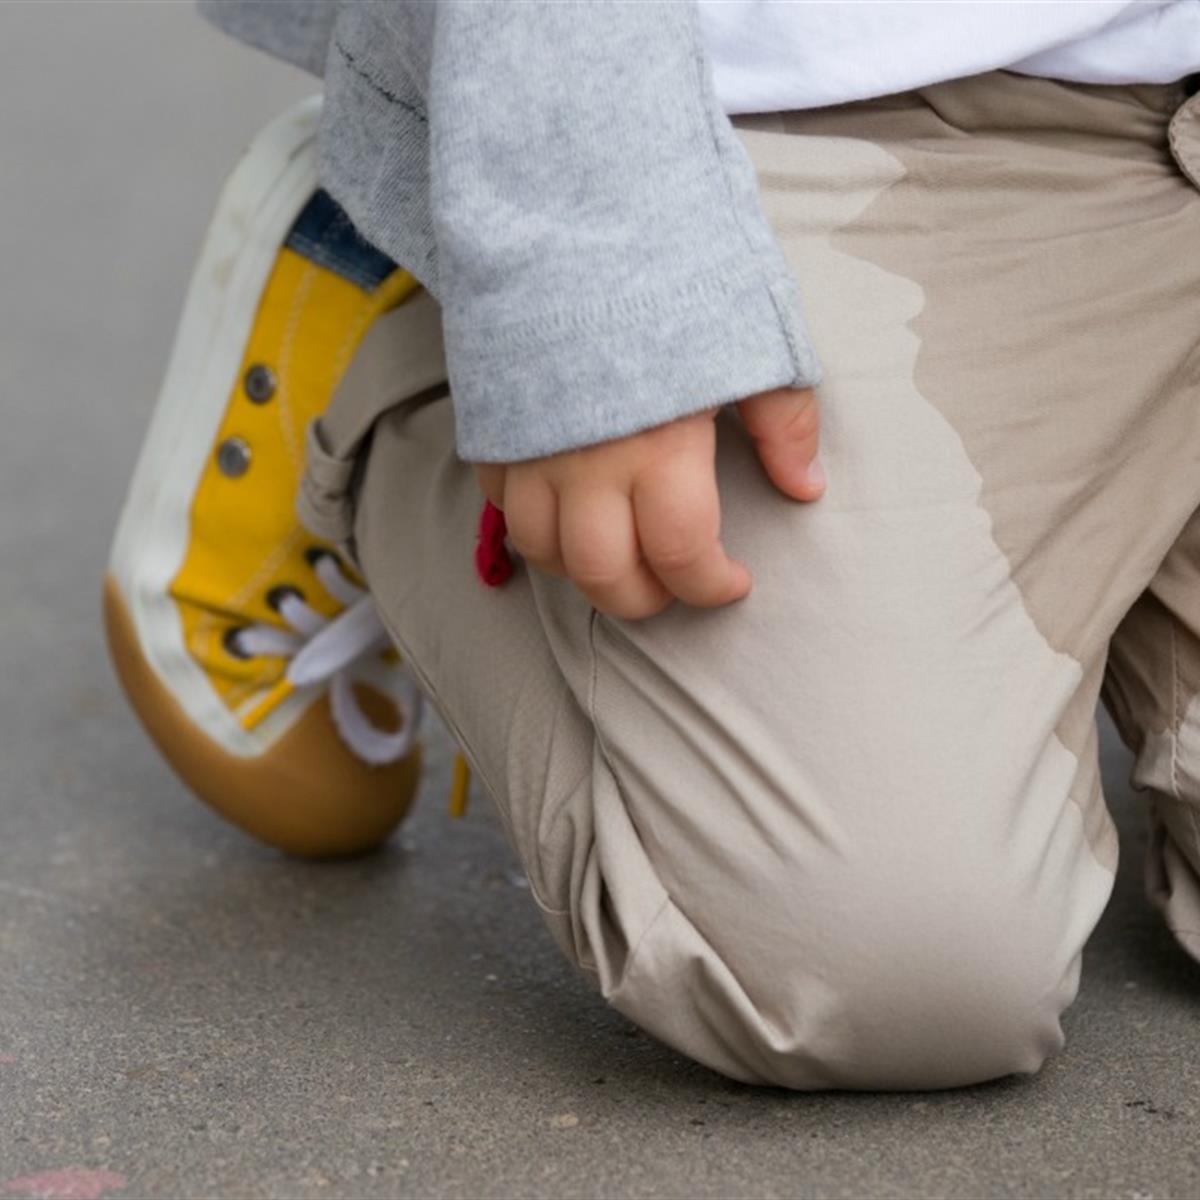 Daytime Accidents & Bladder Control Problems: Voiding Dysfunction Explained  - HealthyChildren.org